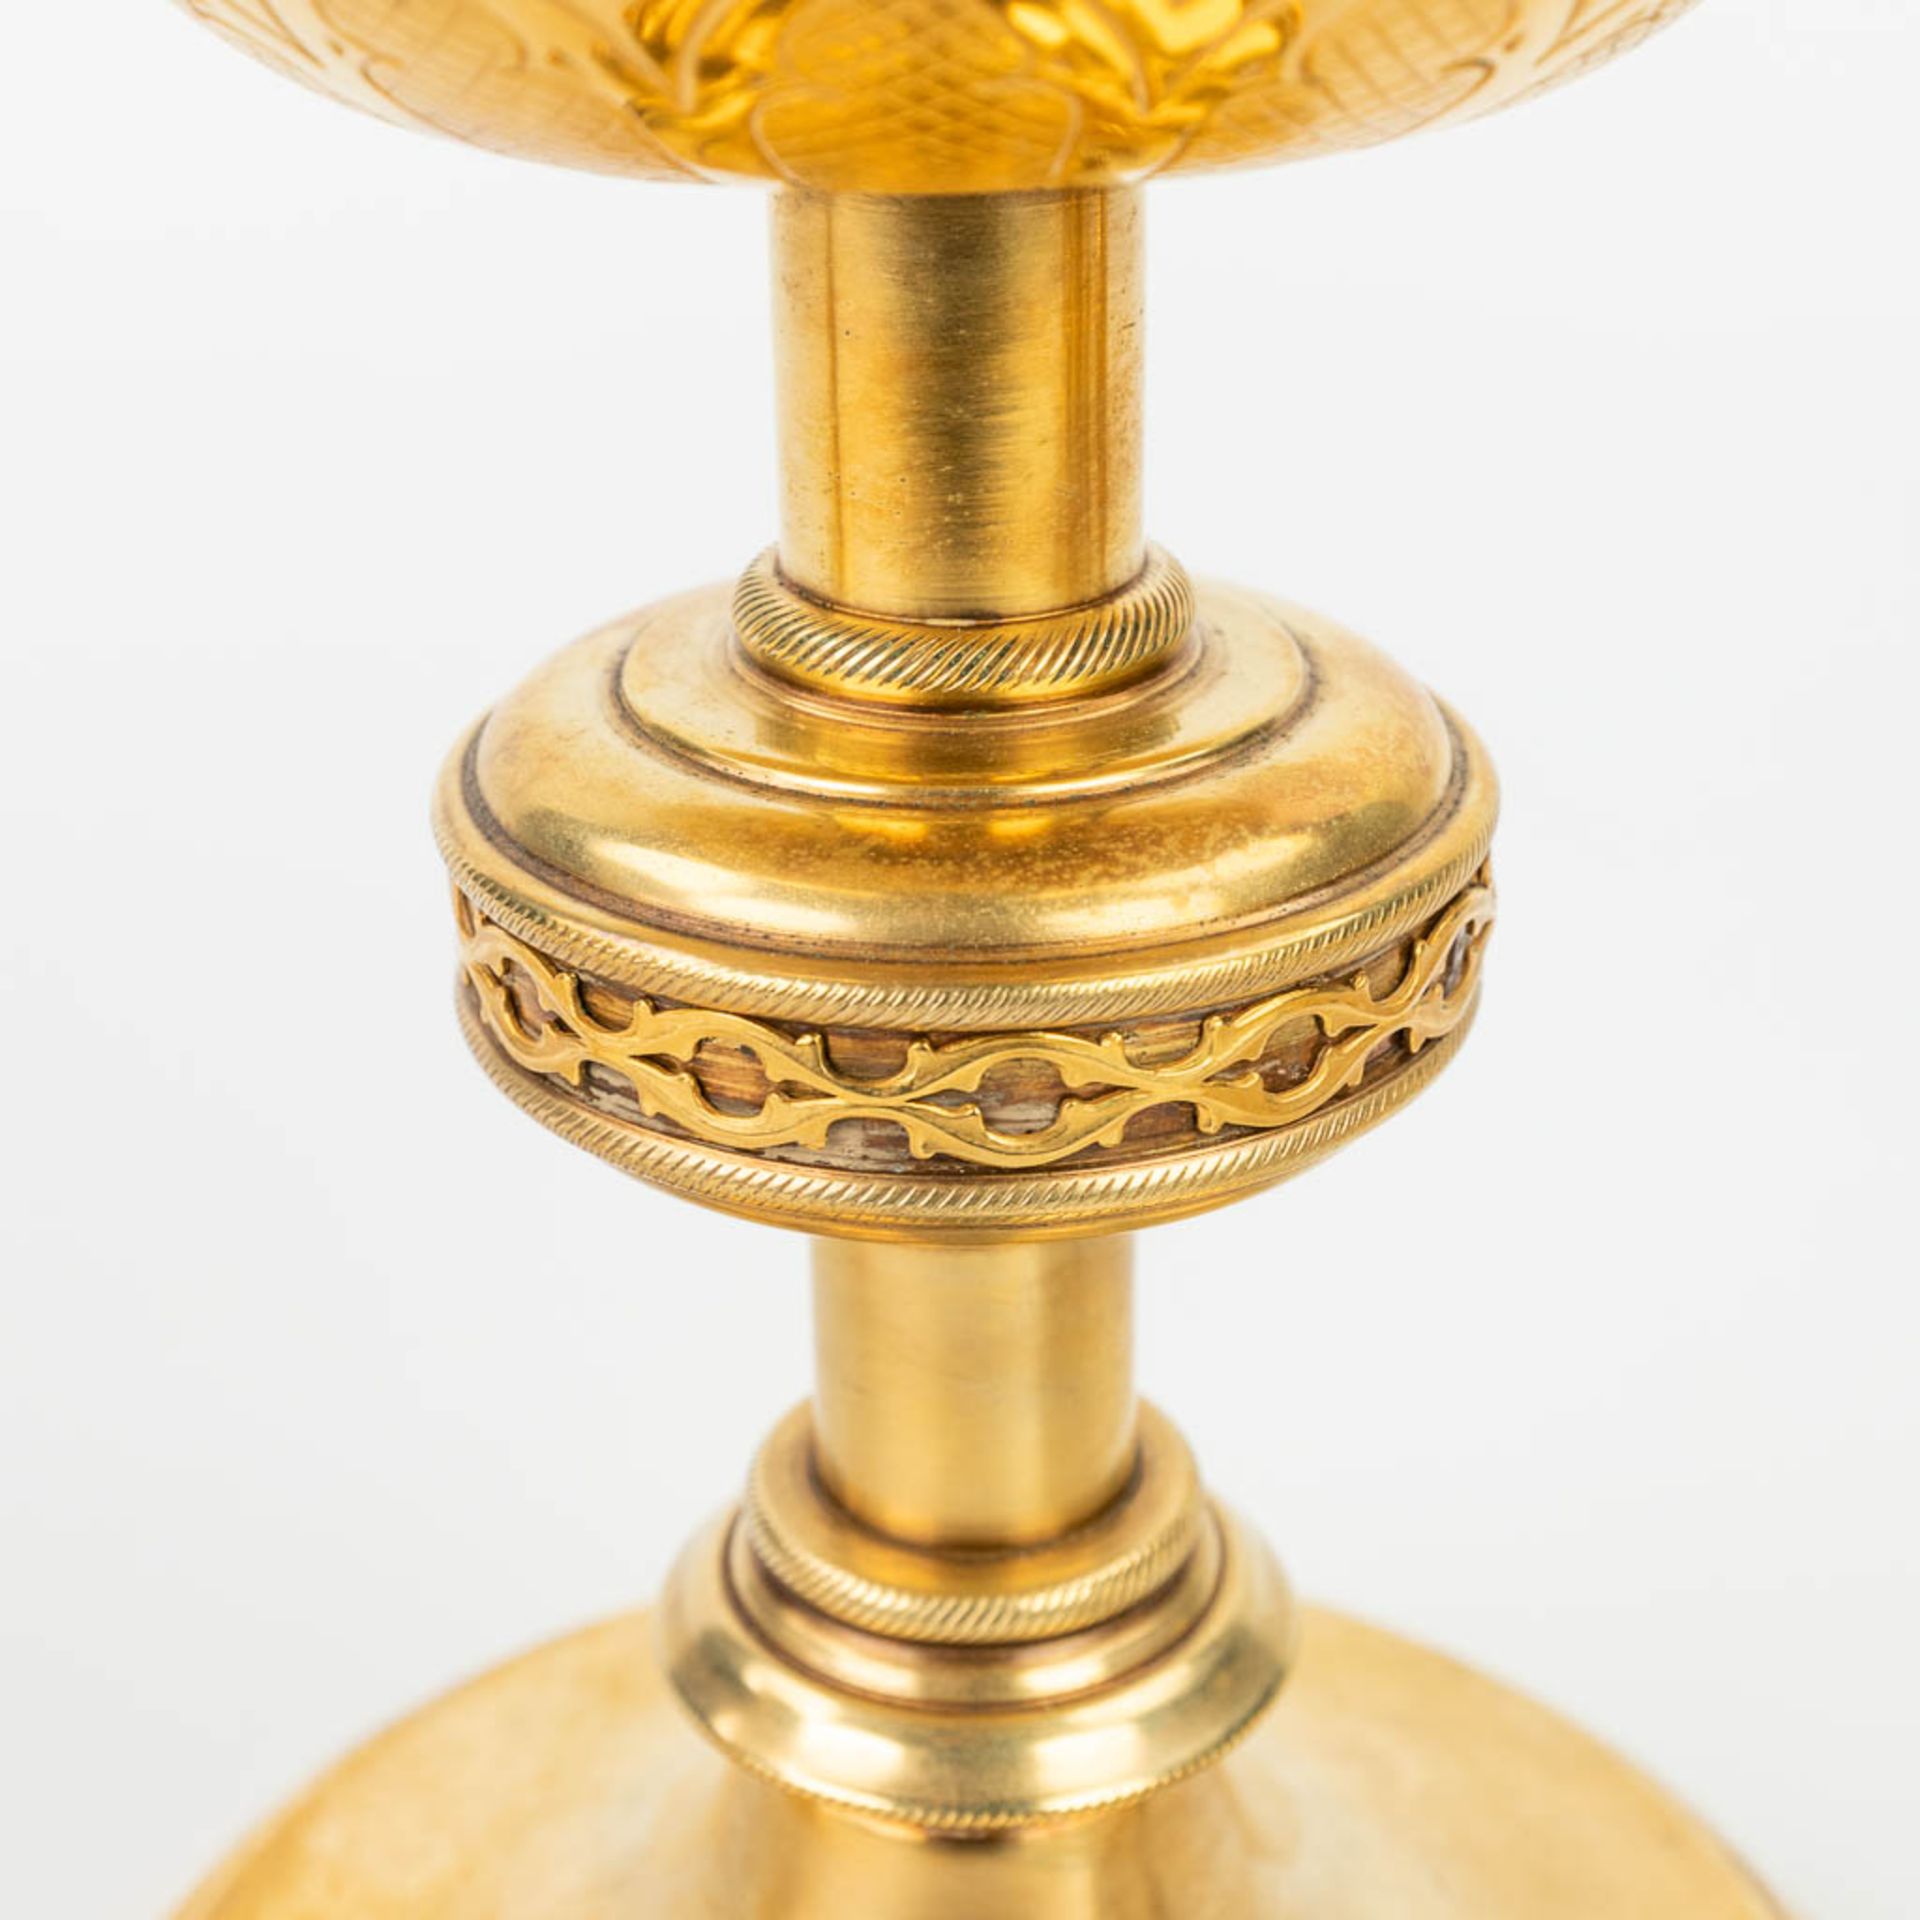 A collection of 4 large ciboria and a chalice made of silver and gold plated metal. - Image 5 of 24